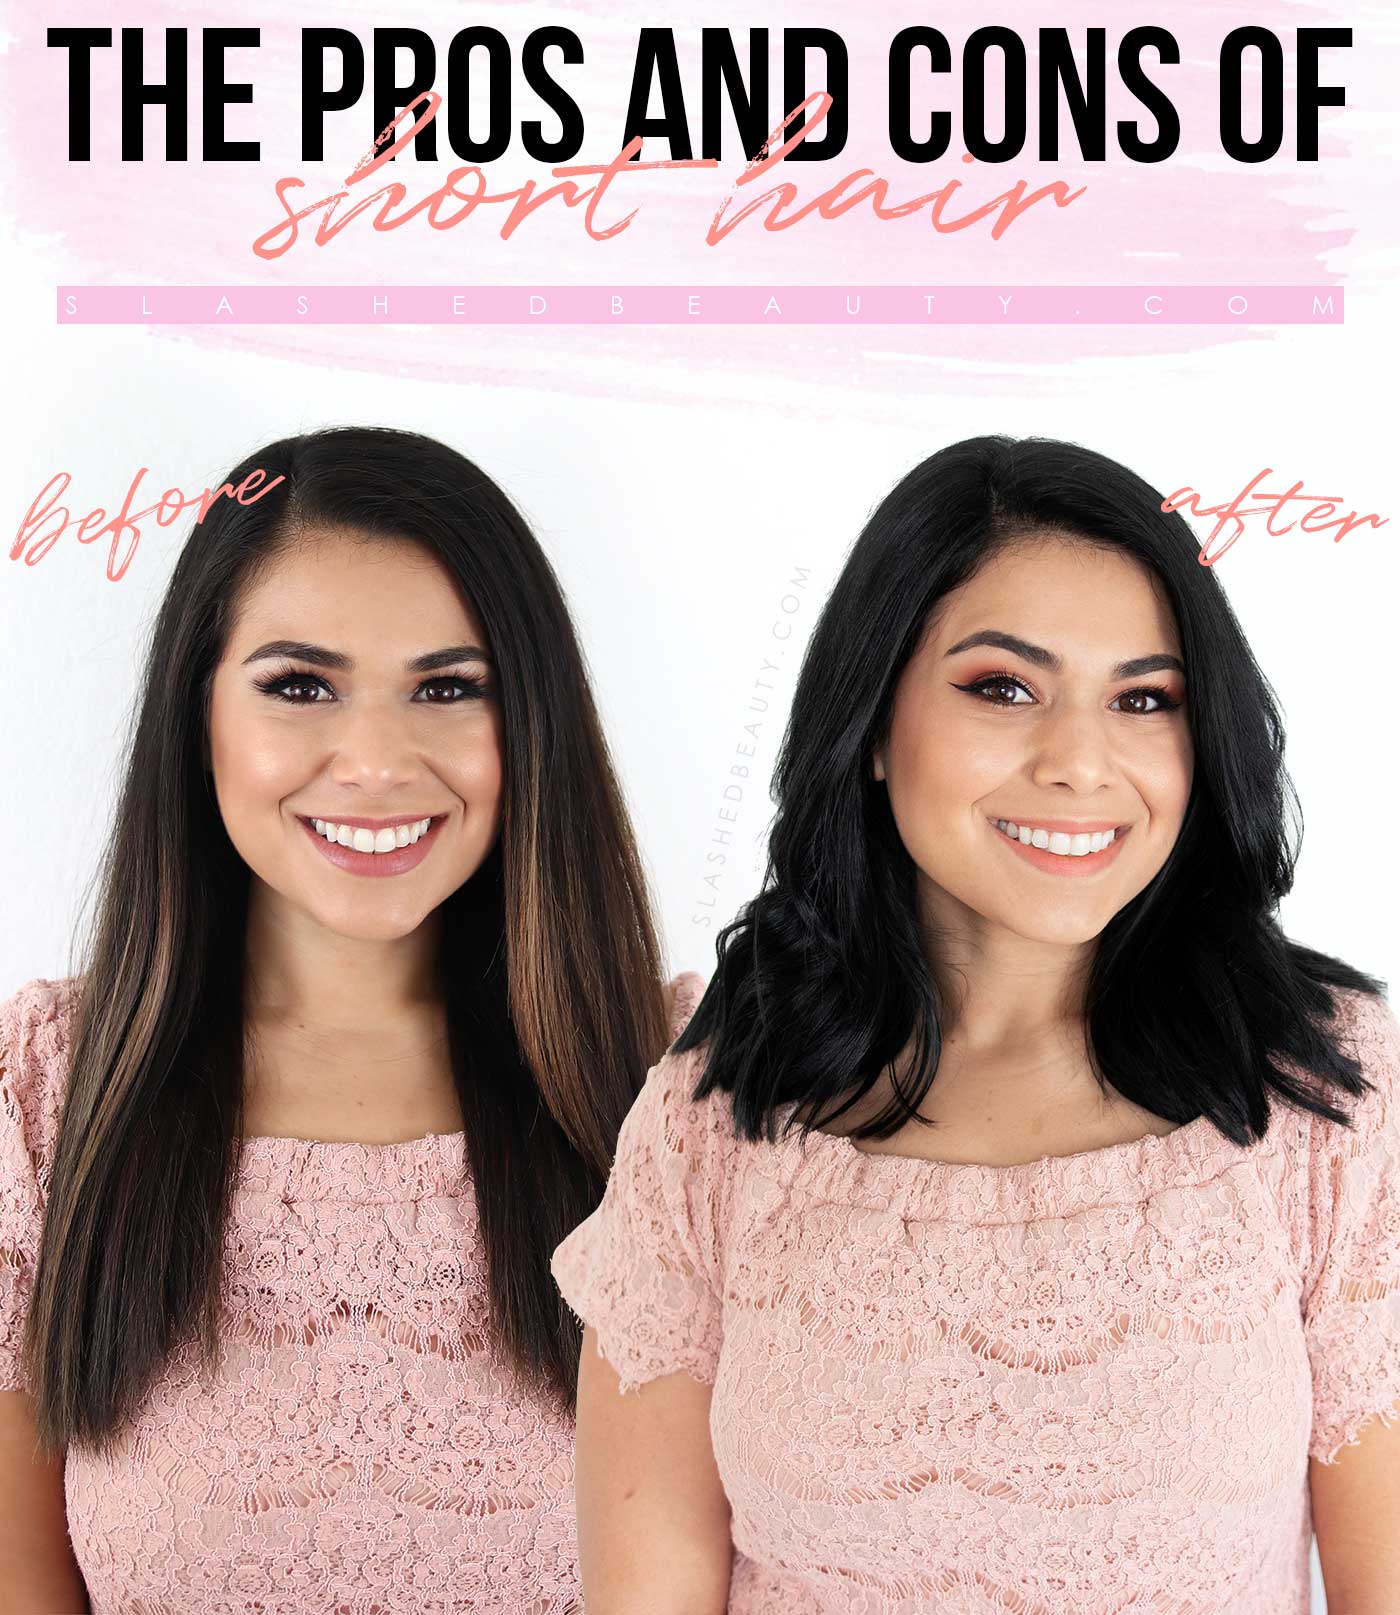 The Pros and Cons of Short Hair | Slashed Beauty